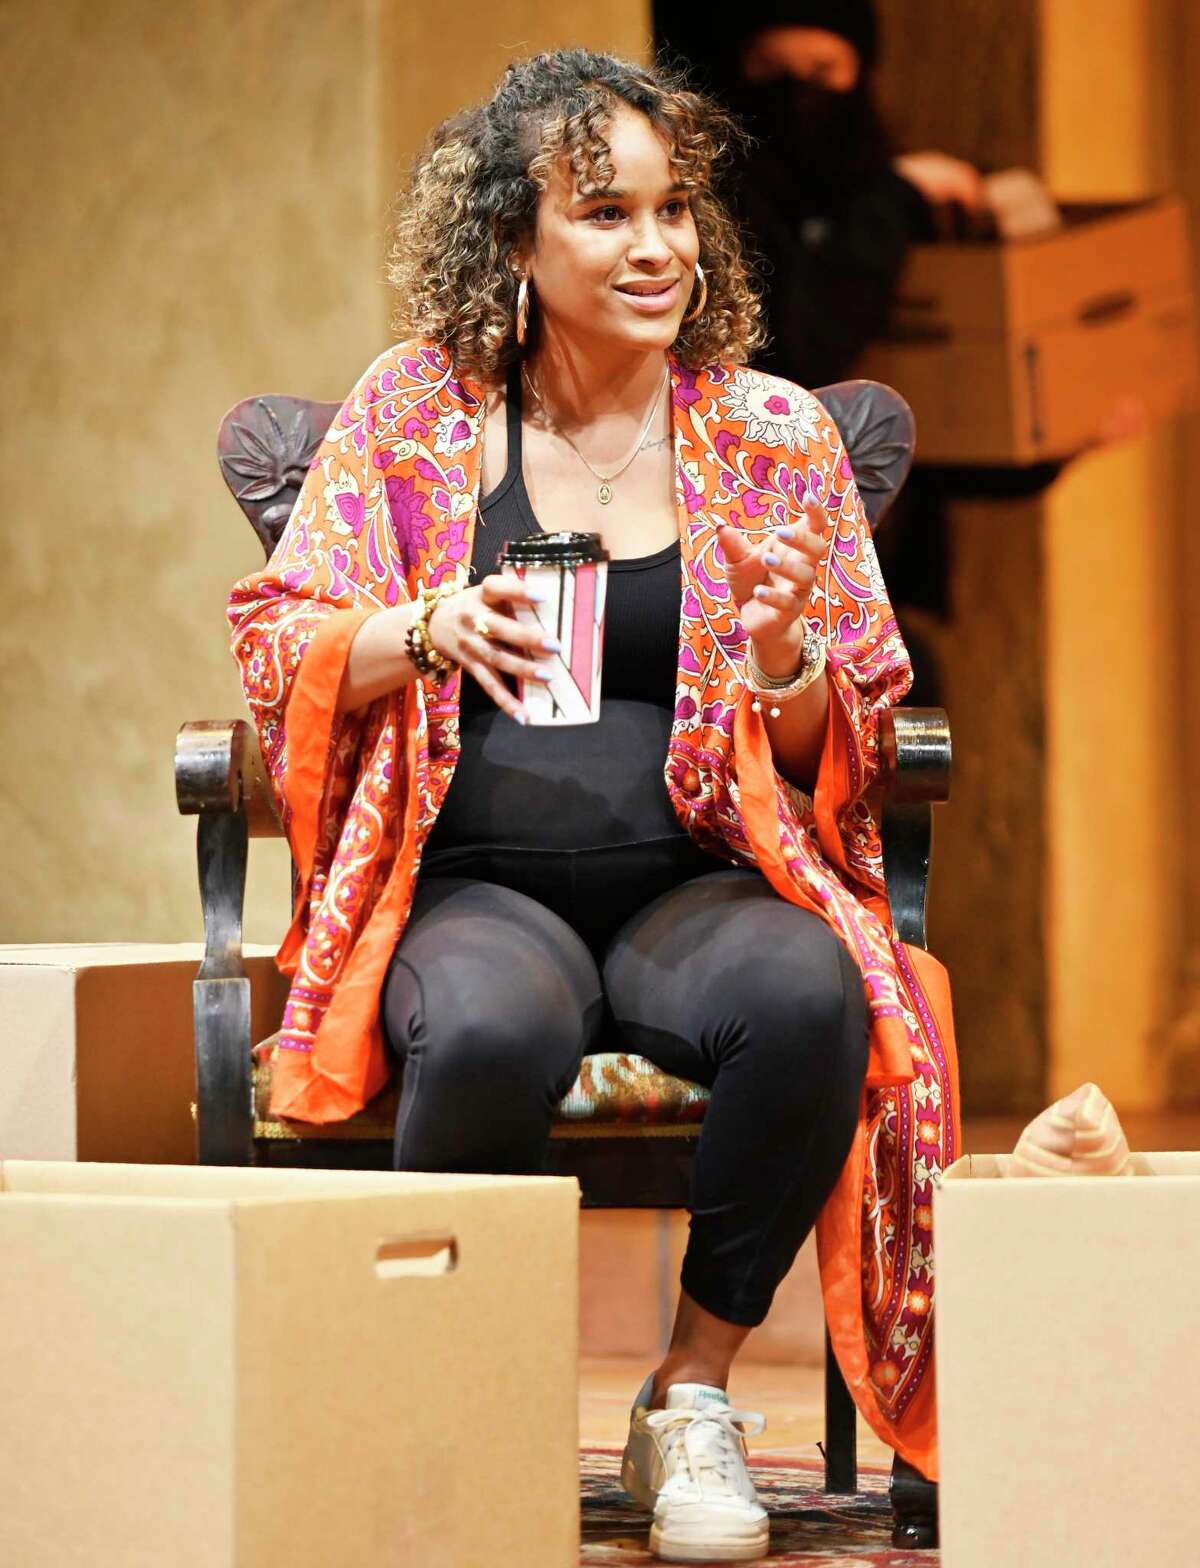 Long Wharf Theatre in New Haven is staging Eliana Pipes’ intriguing “Dream Hou$e” through April 3. Actors include Renata Eastlick and Marianna McClellan.